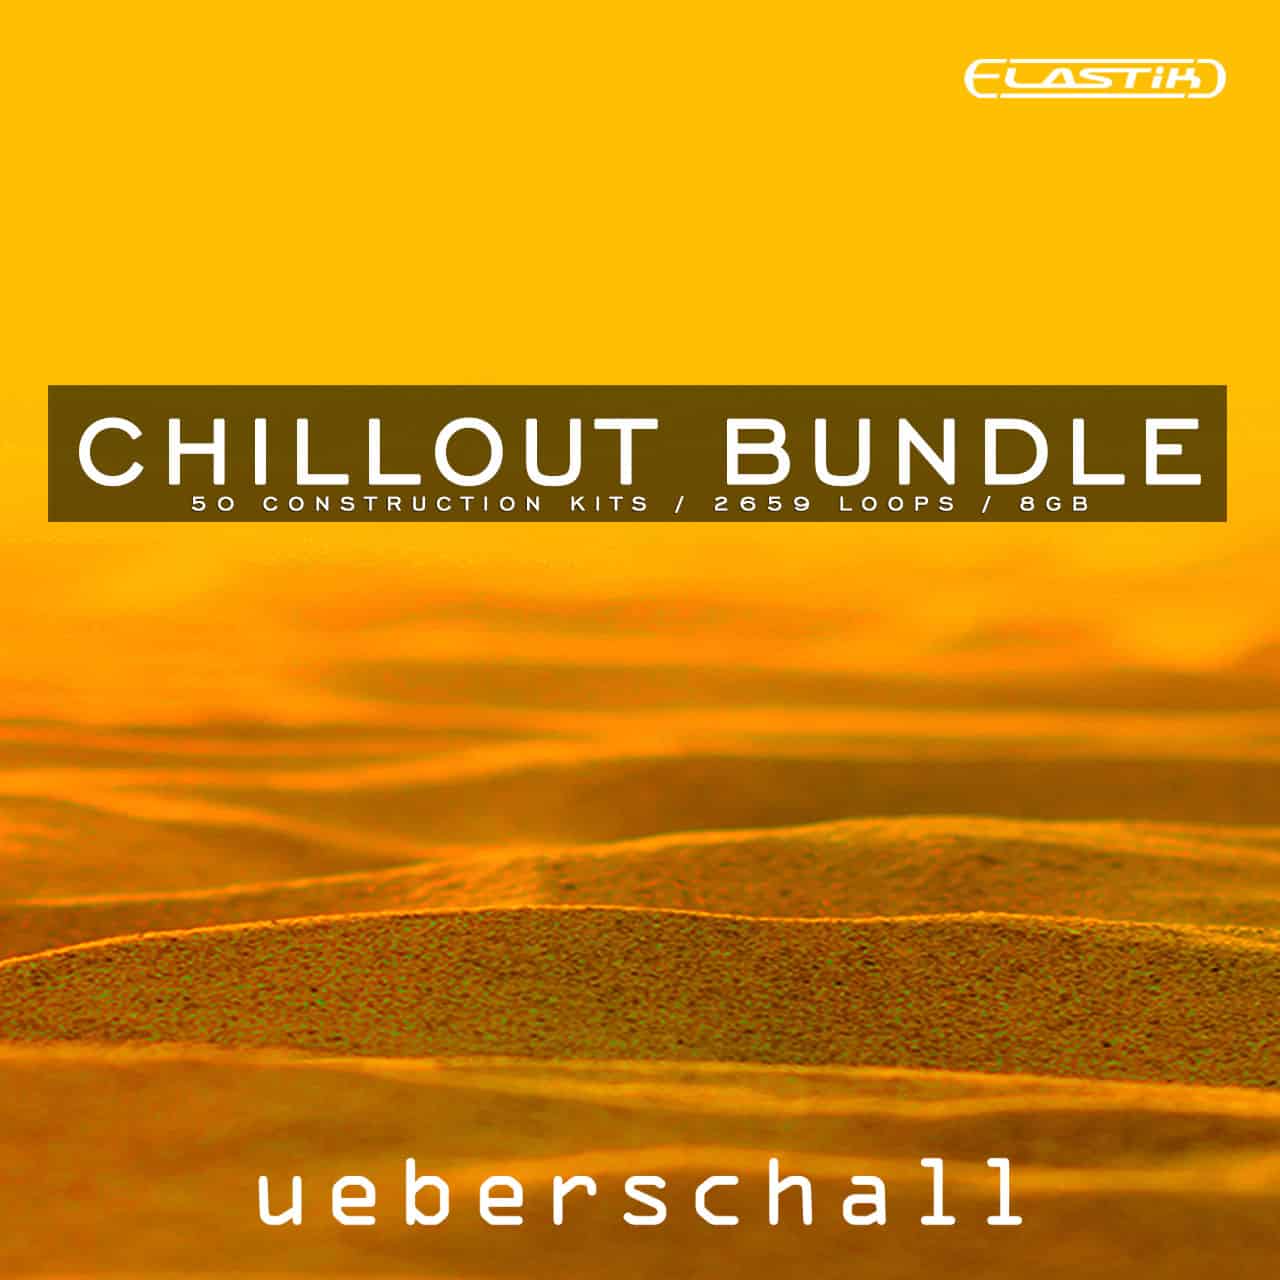 Chillout Bundle by Ueberschall – The Sample Meisters from Germany